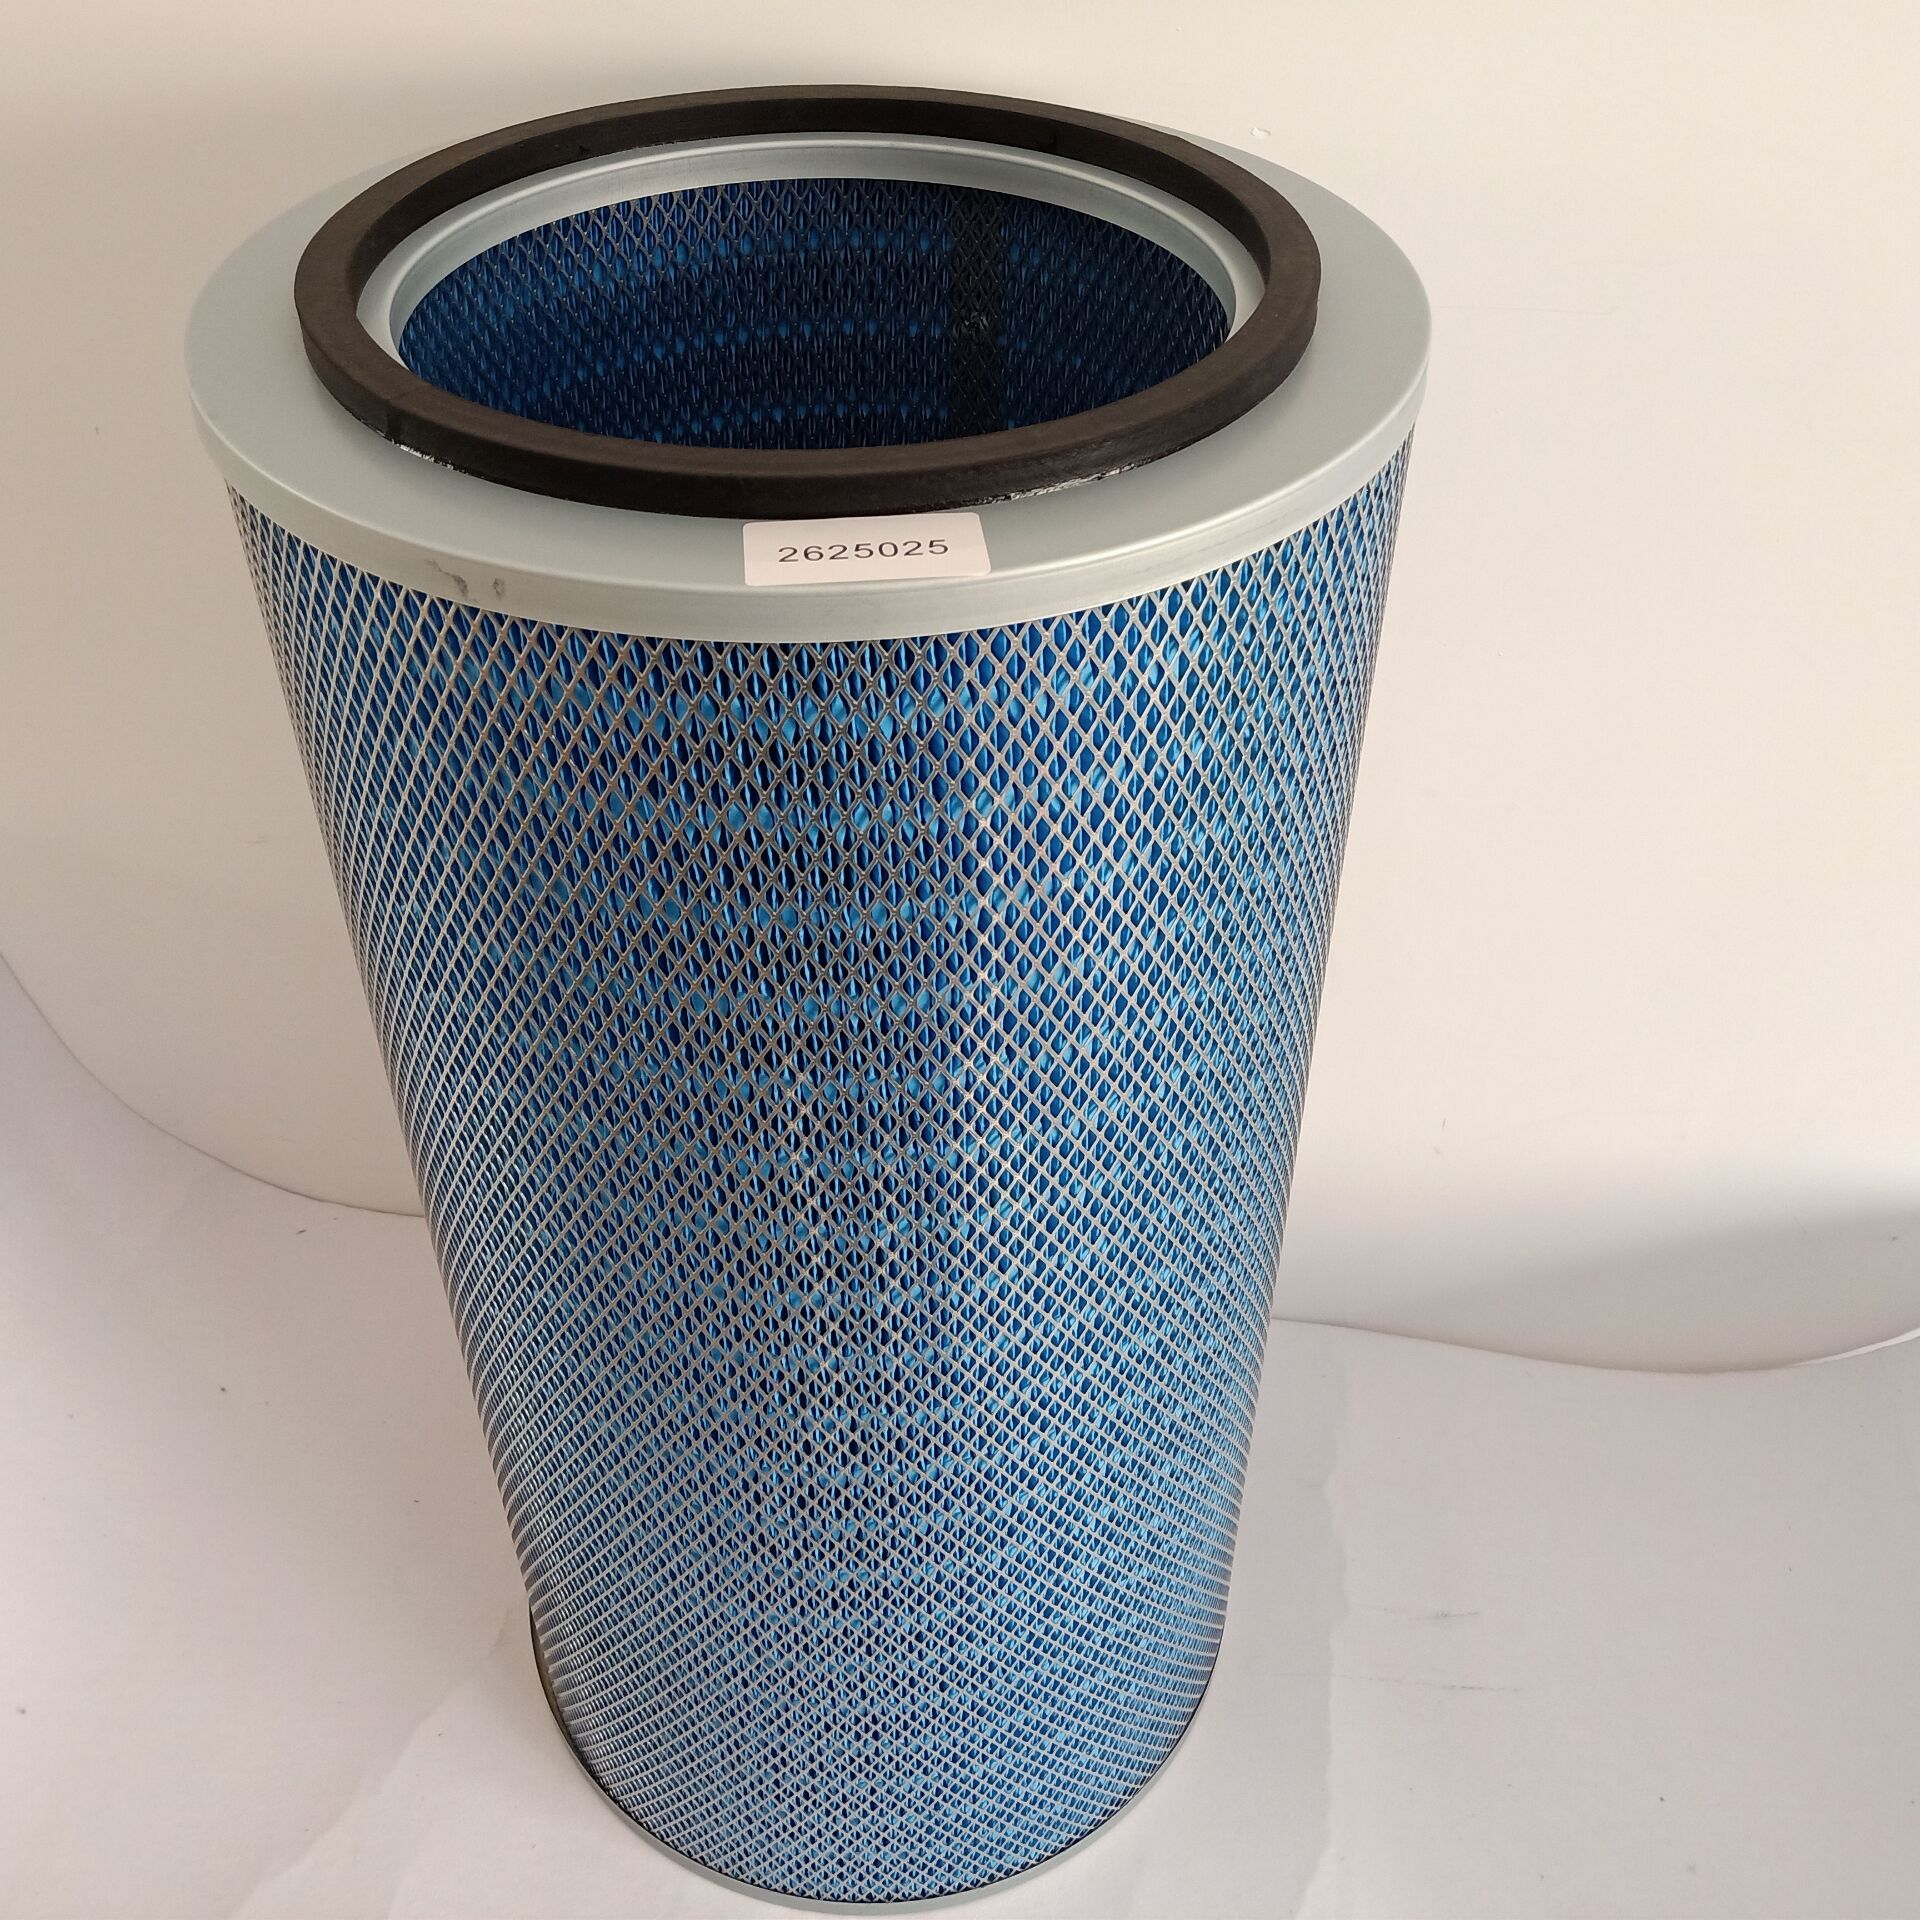 2625025 Fire retardant coating polyester air dust filter 